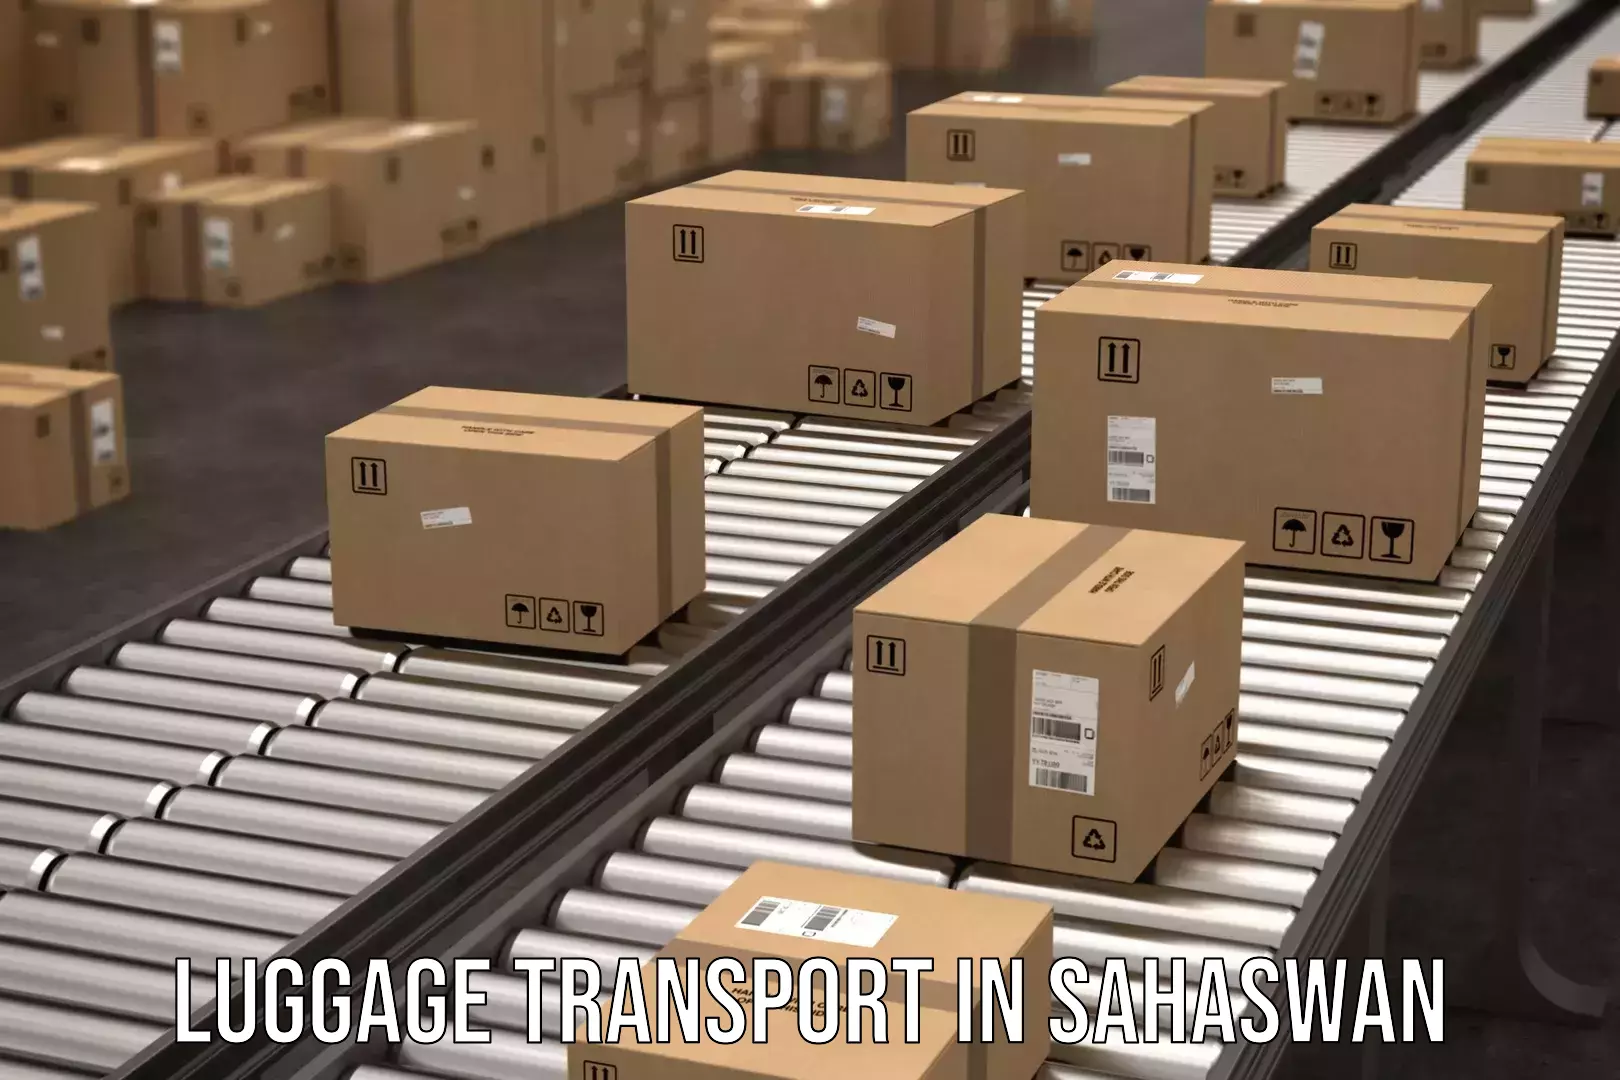 Automated luggage transport in Sahaswan